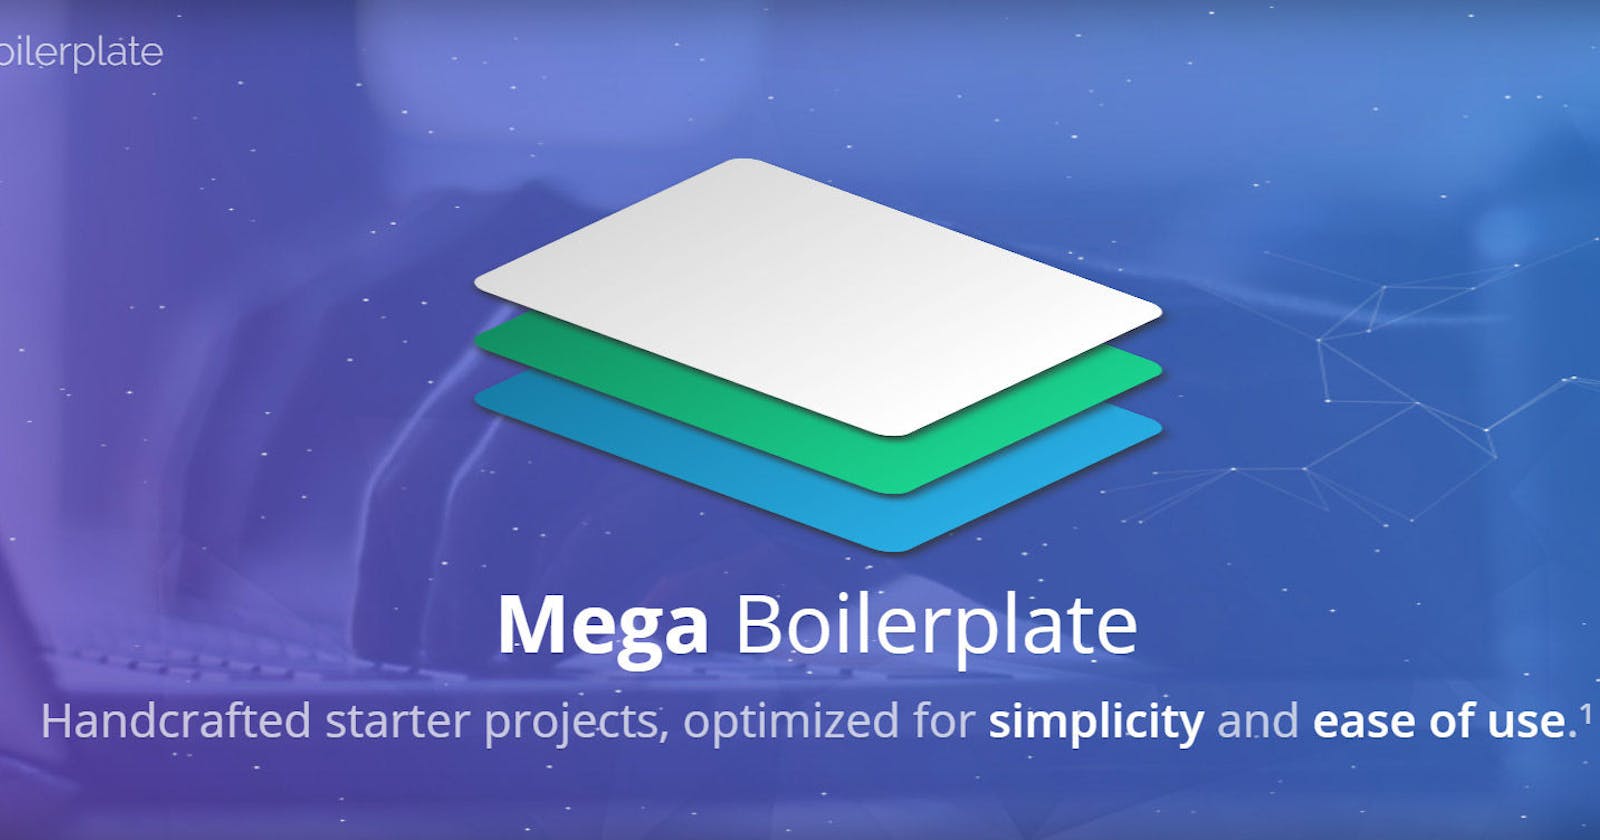 Mega Boilerplate ★ Handcrafted starter projects, optimized for simplicity and ease of use